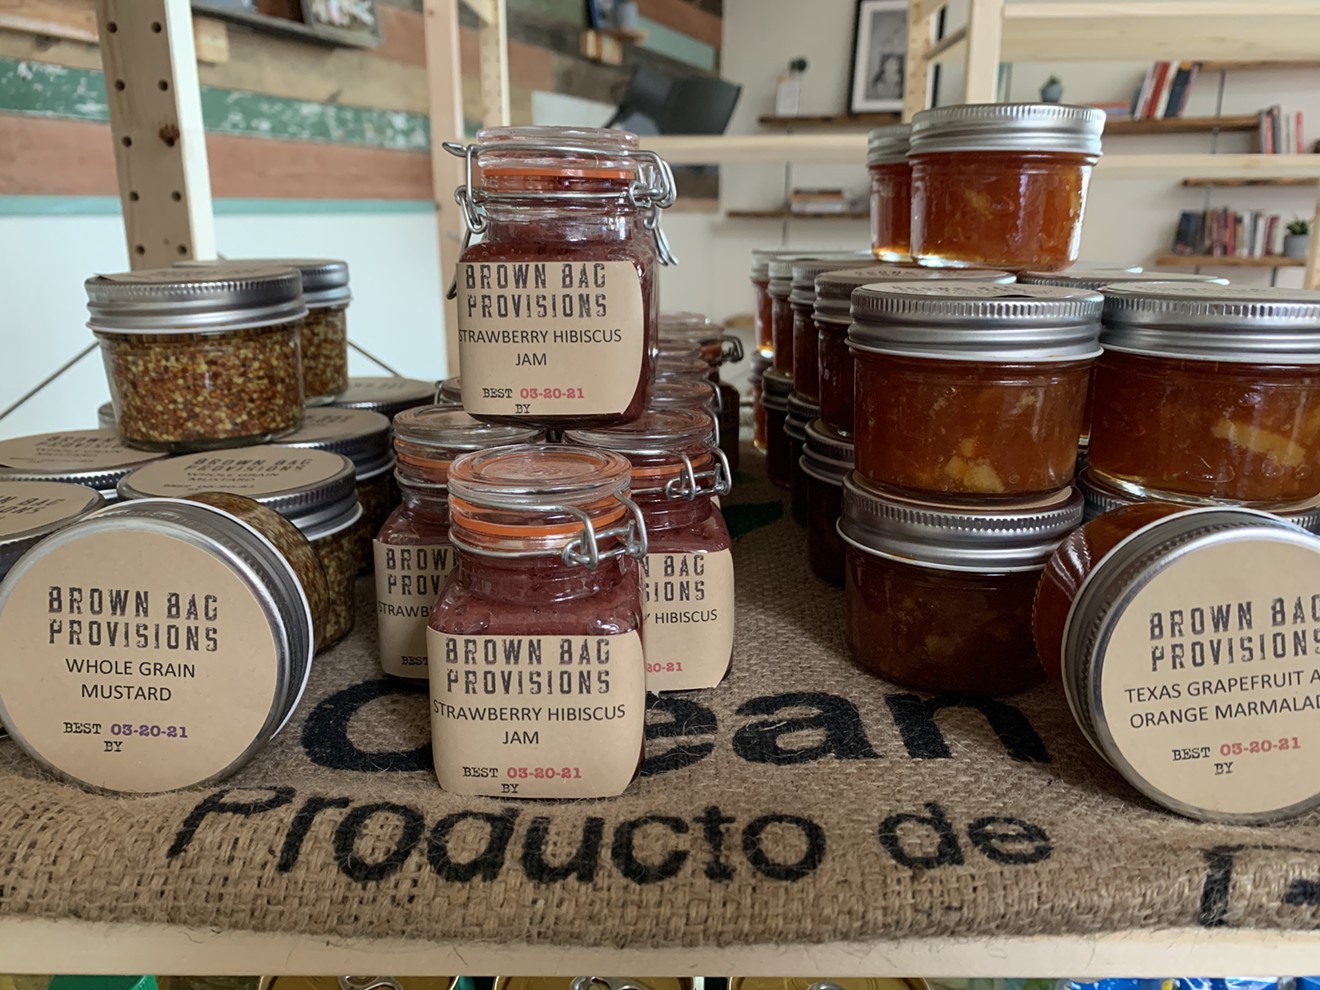 Homemade jam is just a bit of what's created at Brown Bag Provisions.